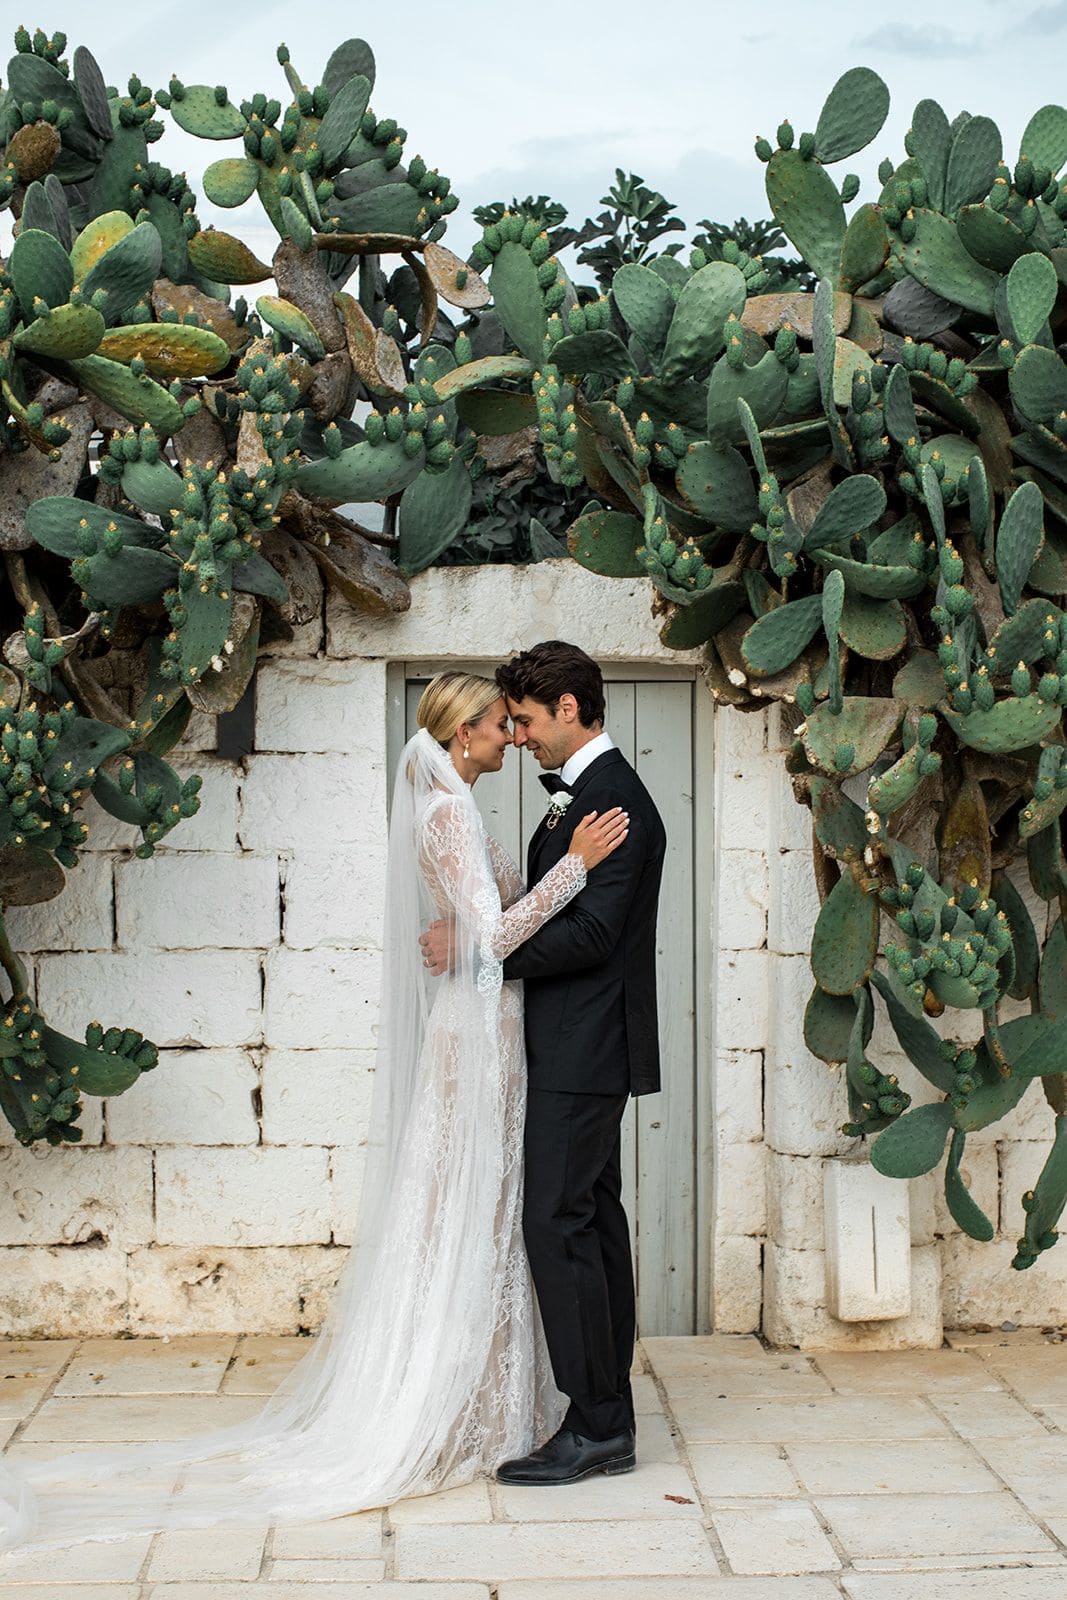 Bride groom embrace during first look portraits at Masseria Potenti wedding